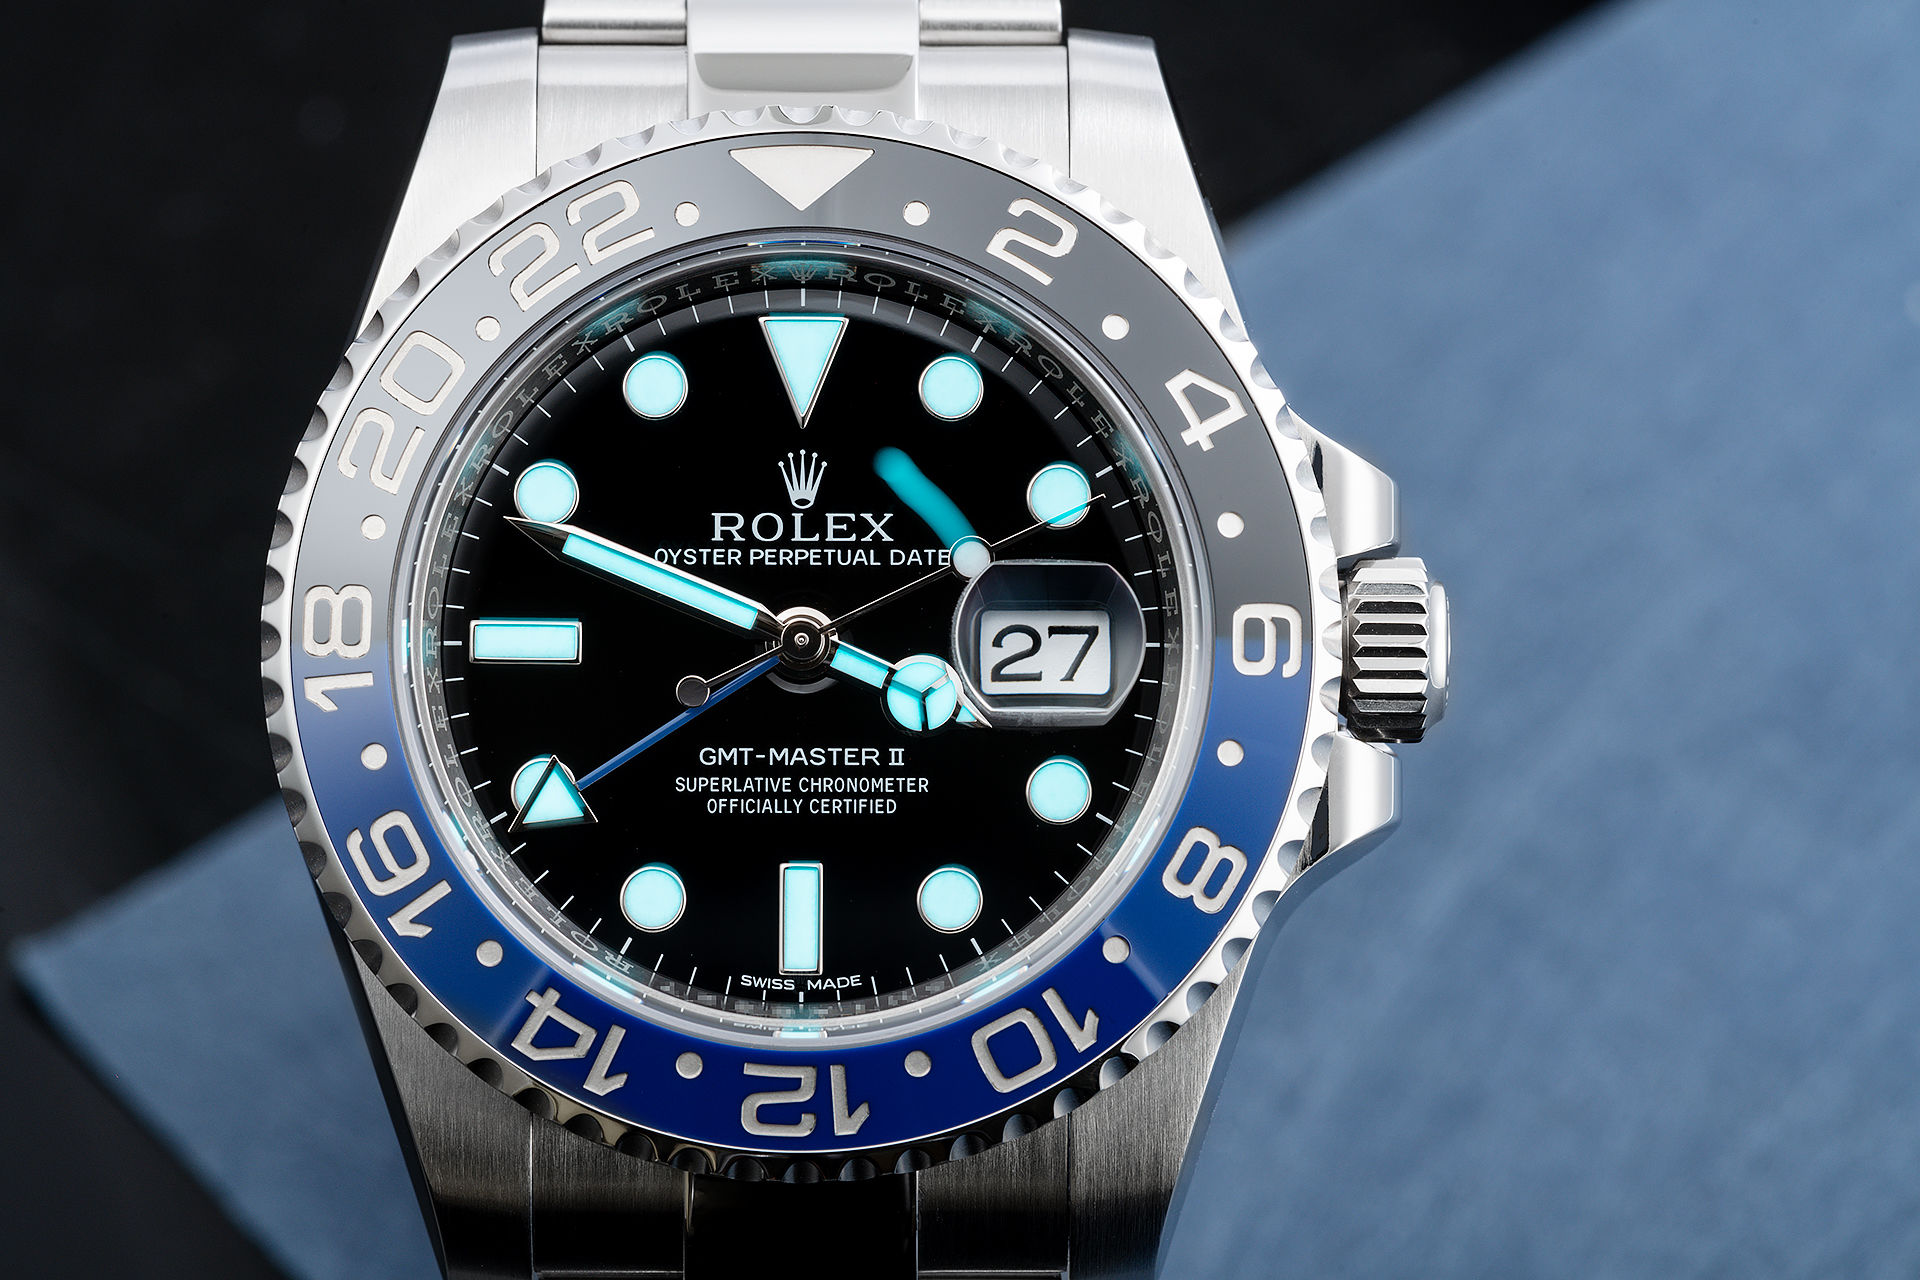 ref 116710BLNR | Complete Set 'Early Example' | Rolex GMT-Master II